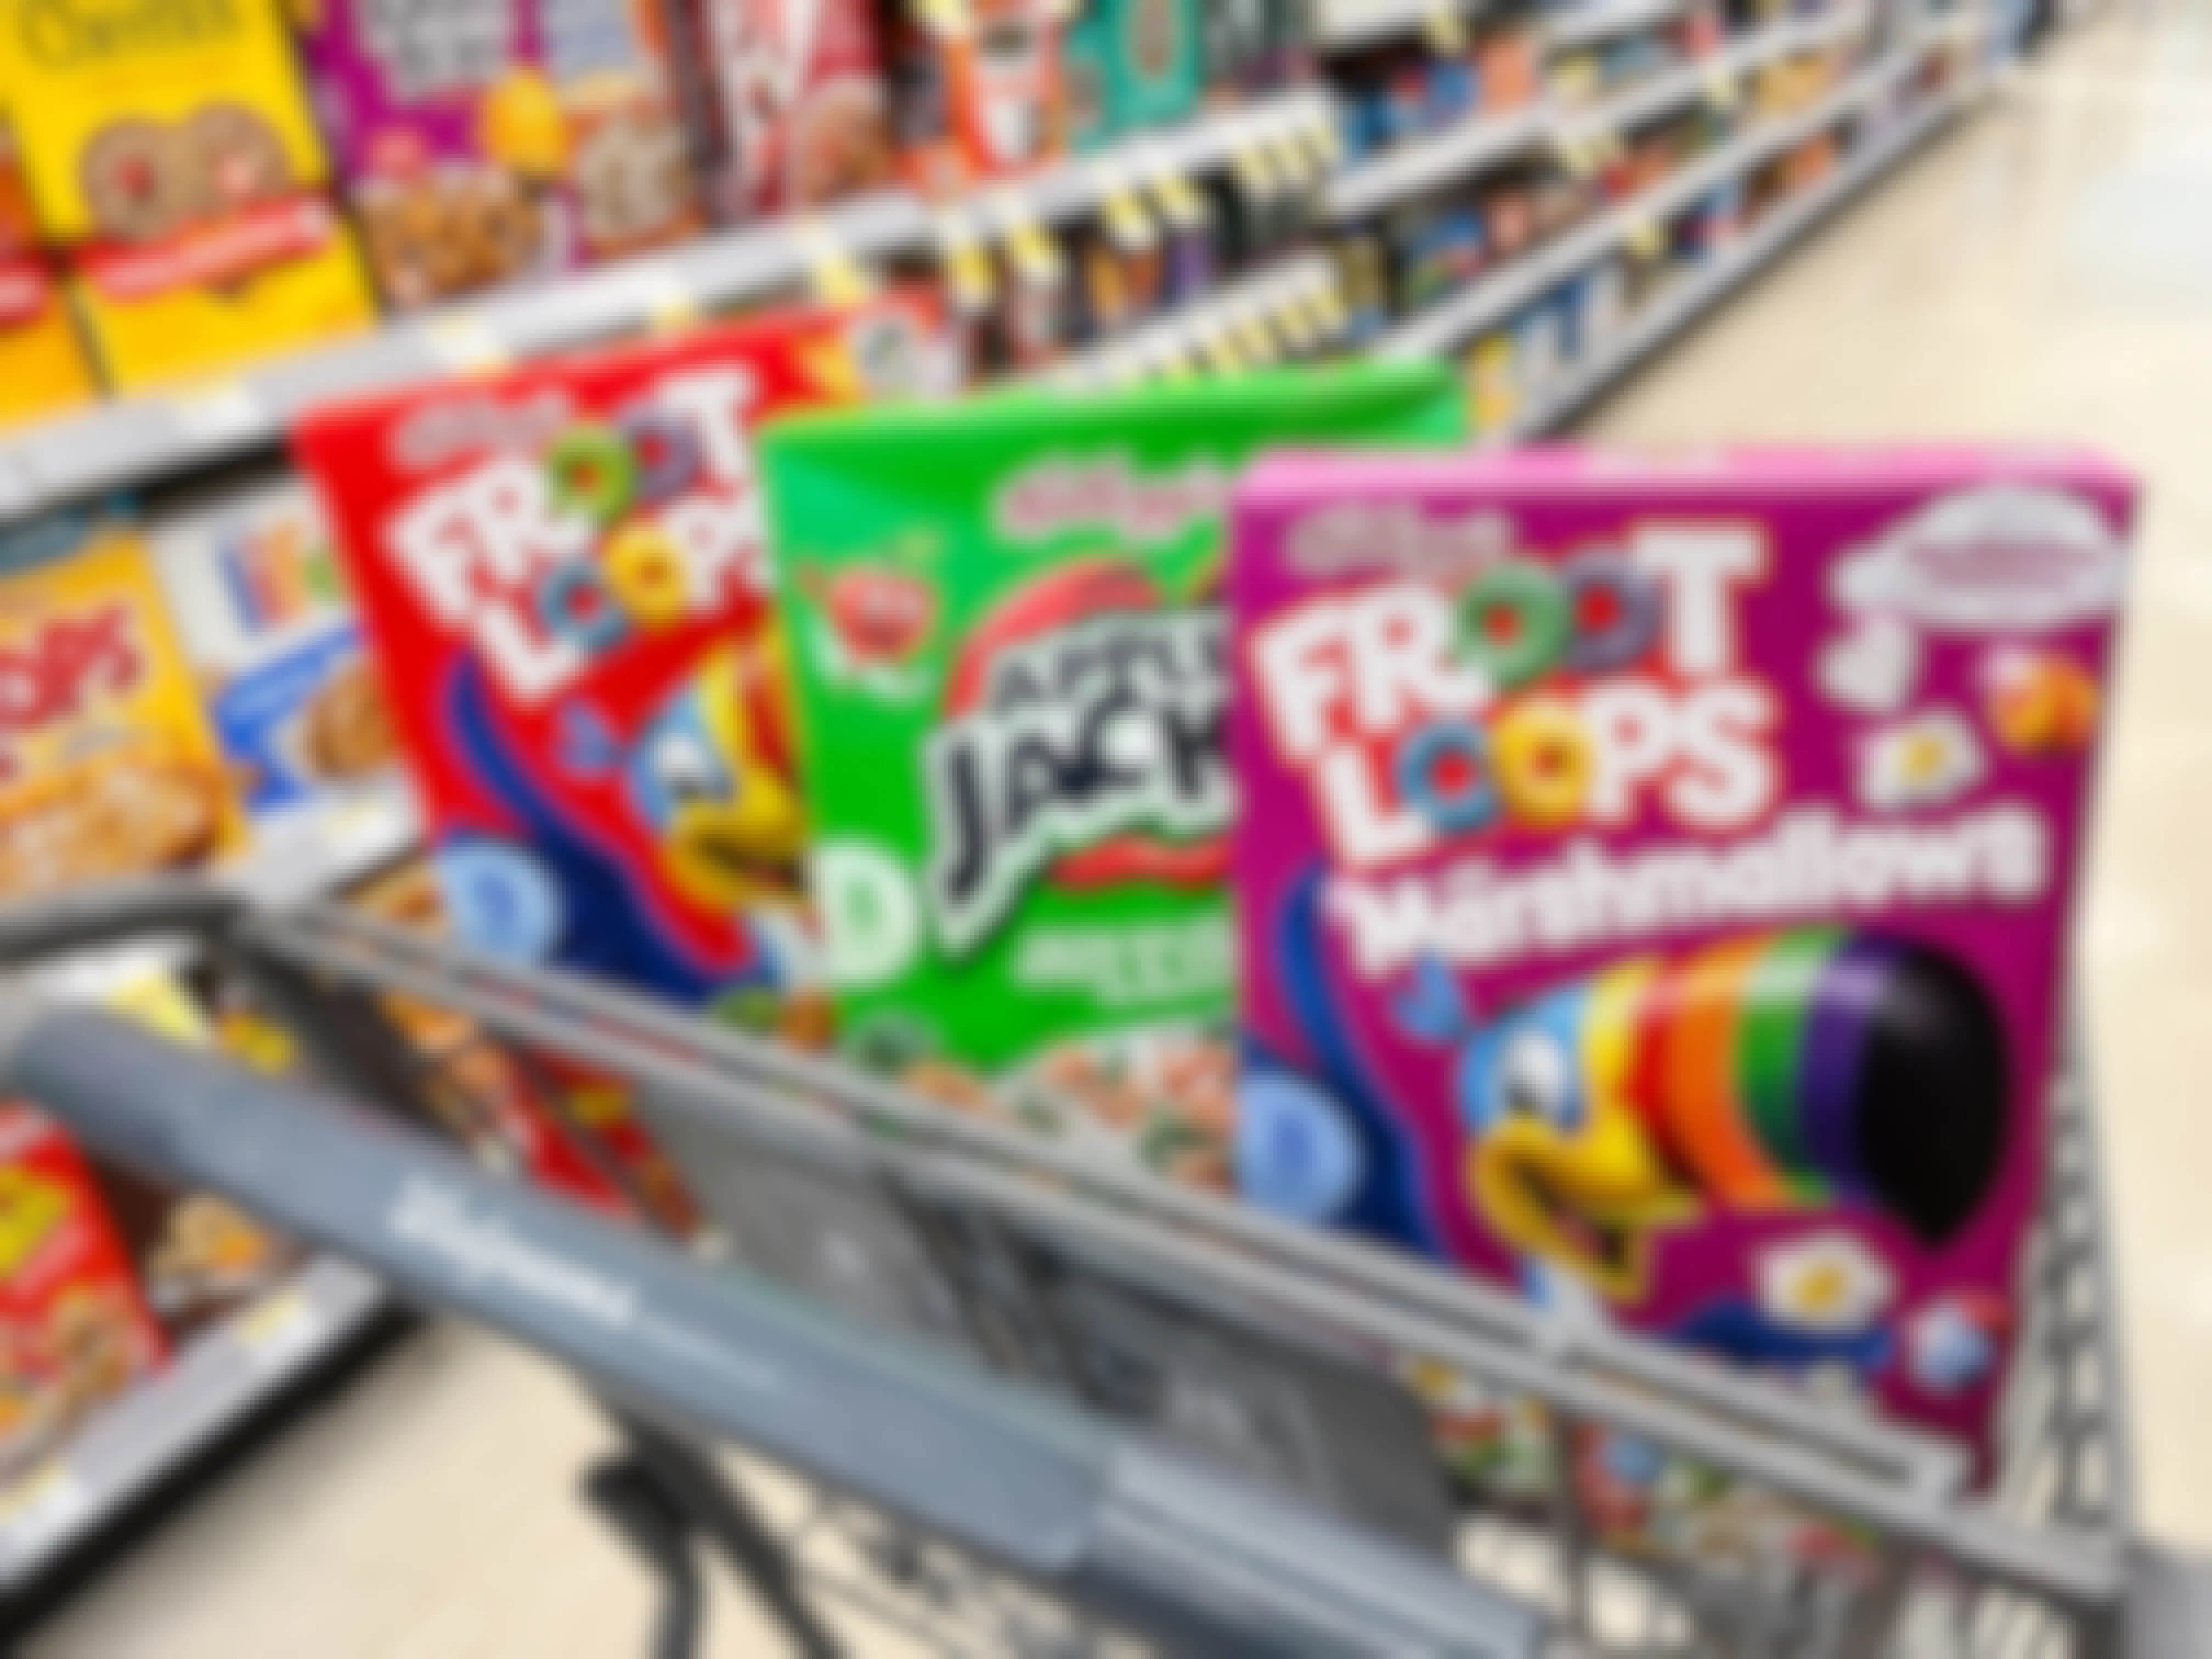 shopping cart with a box of Froot Loops, Apple Jacks, and Froot Loops with Marshmallows inside